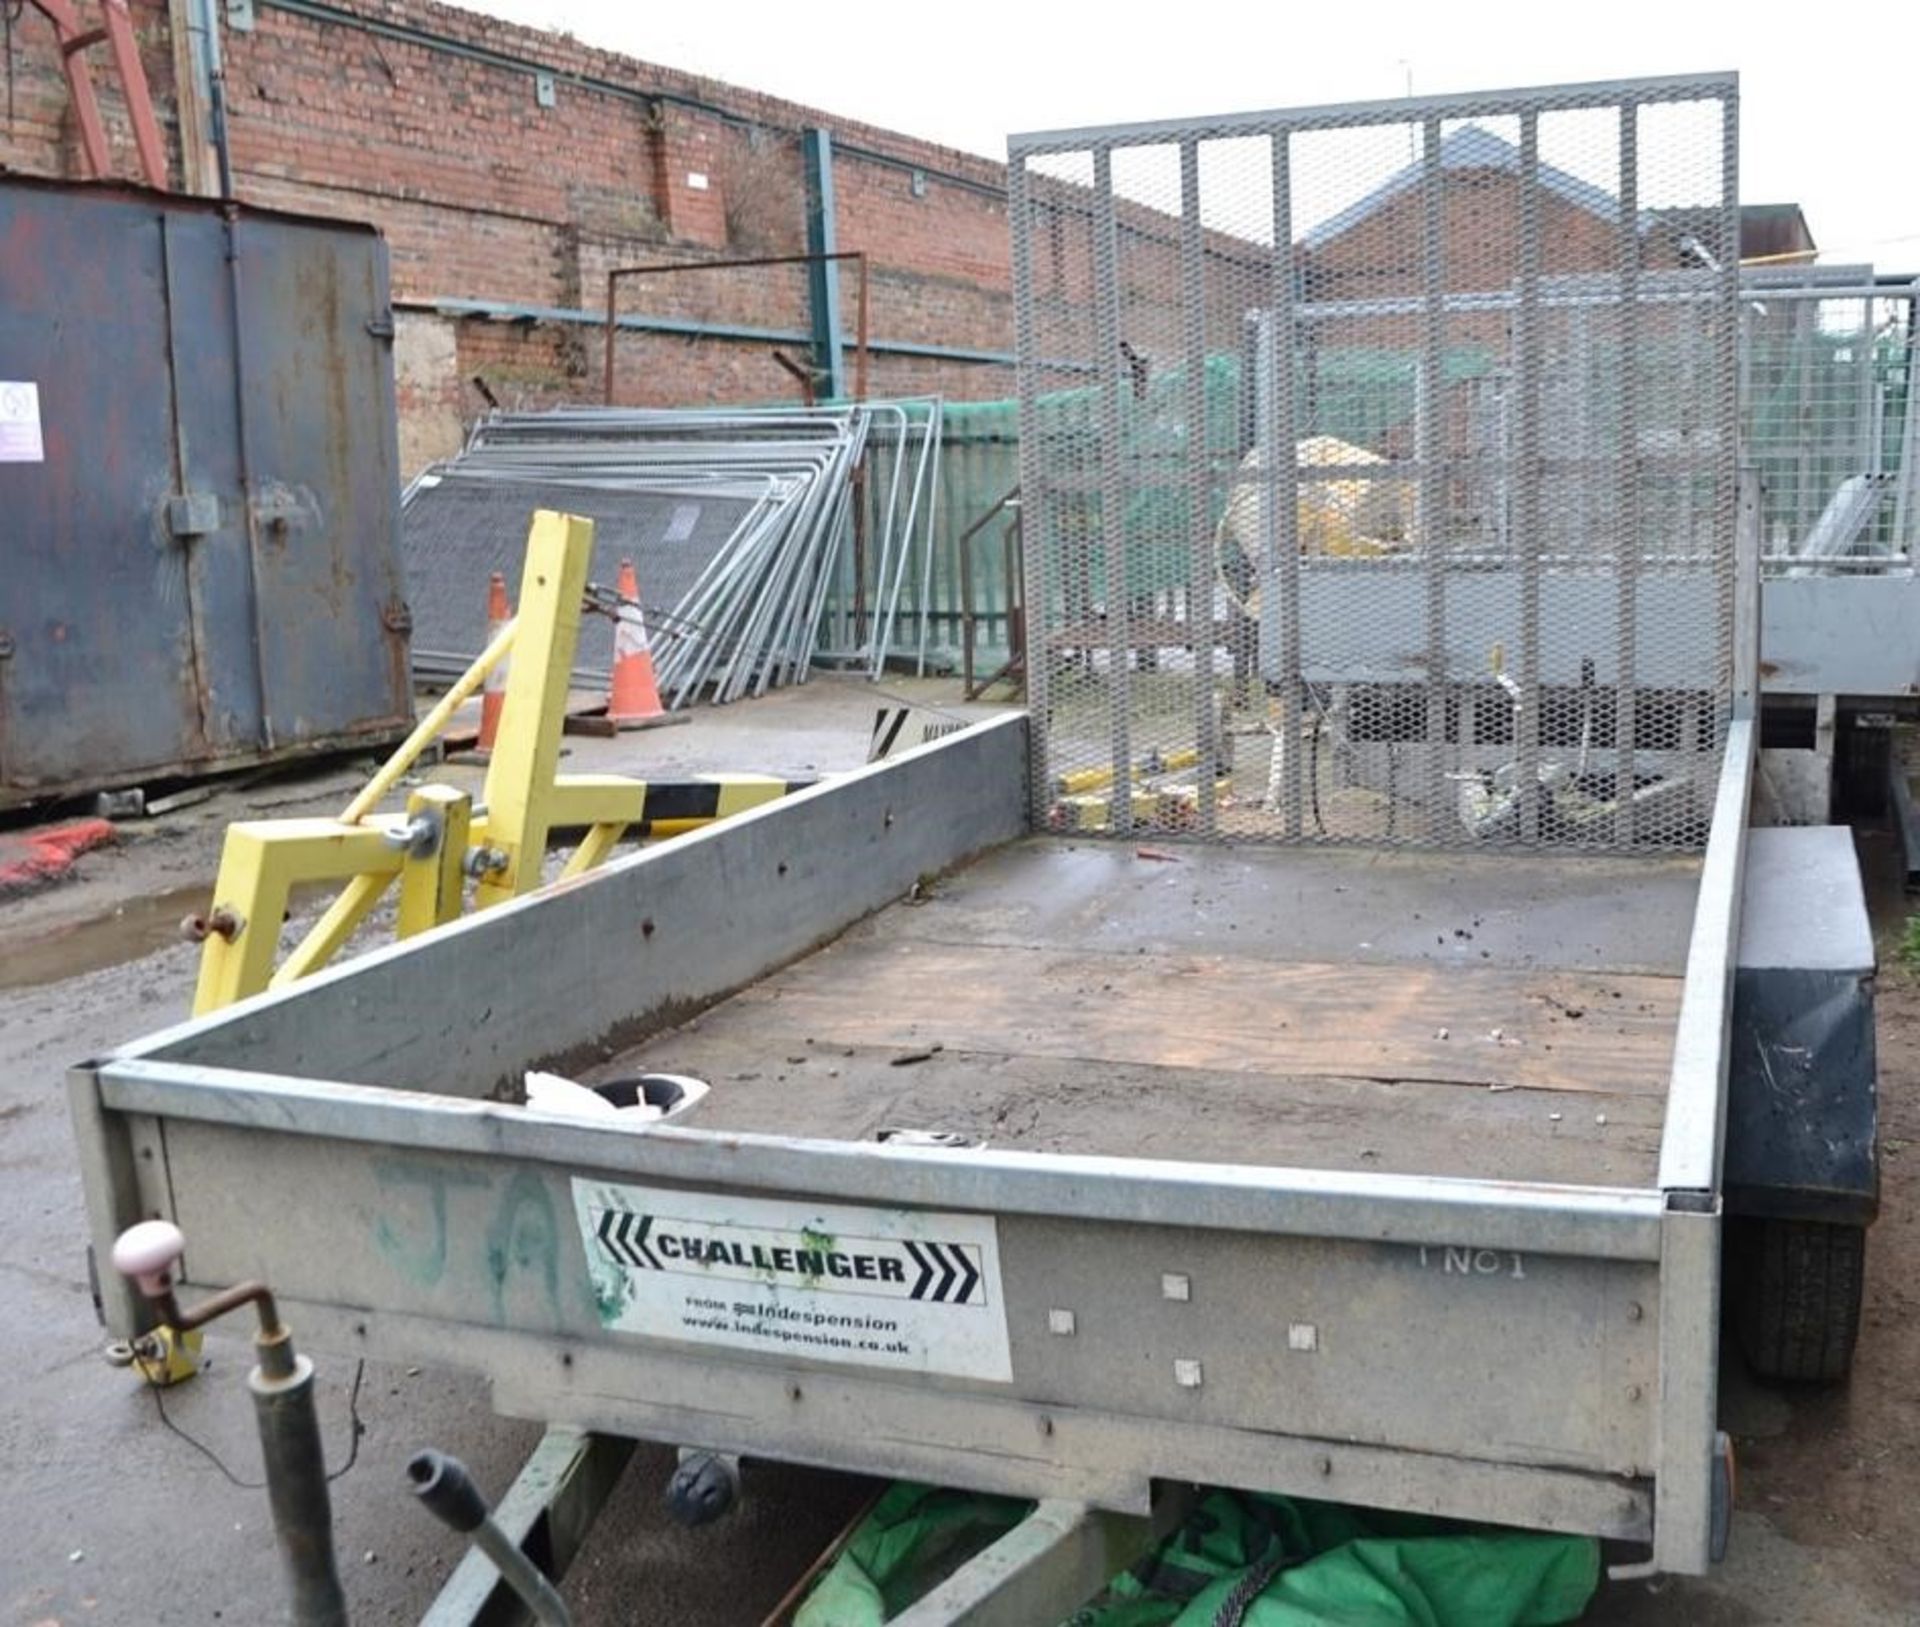 1 x Challenger Indespension 10ft Trailer With 2300Kg Gross Weight - CL464 - Location:Liverpool L19 - Image 6 of 25